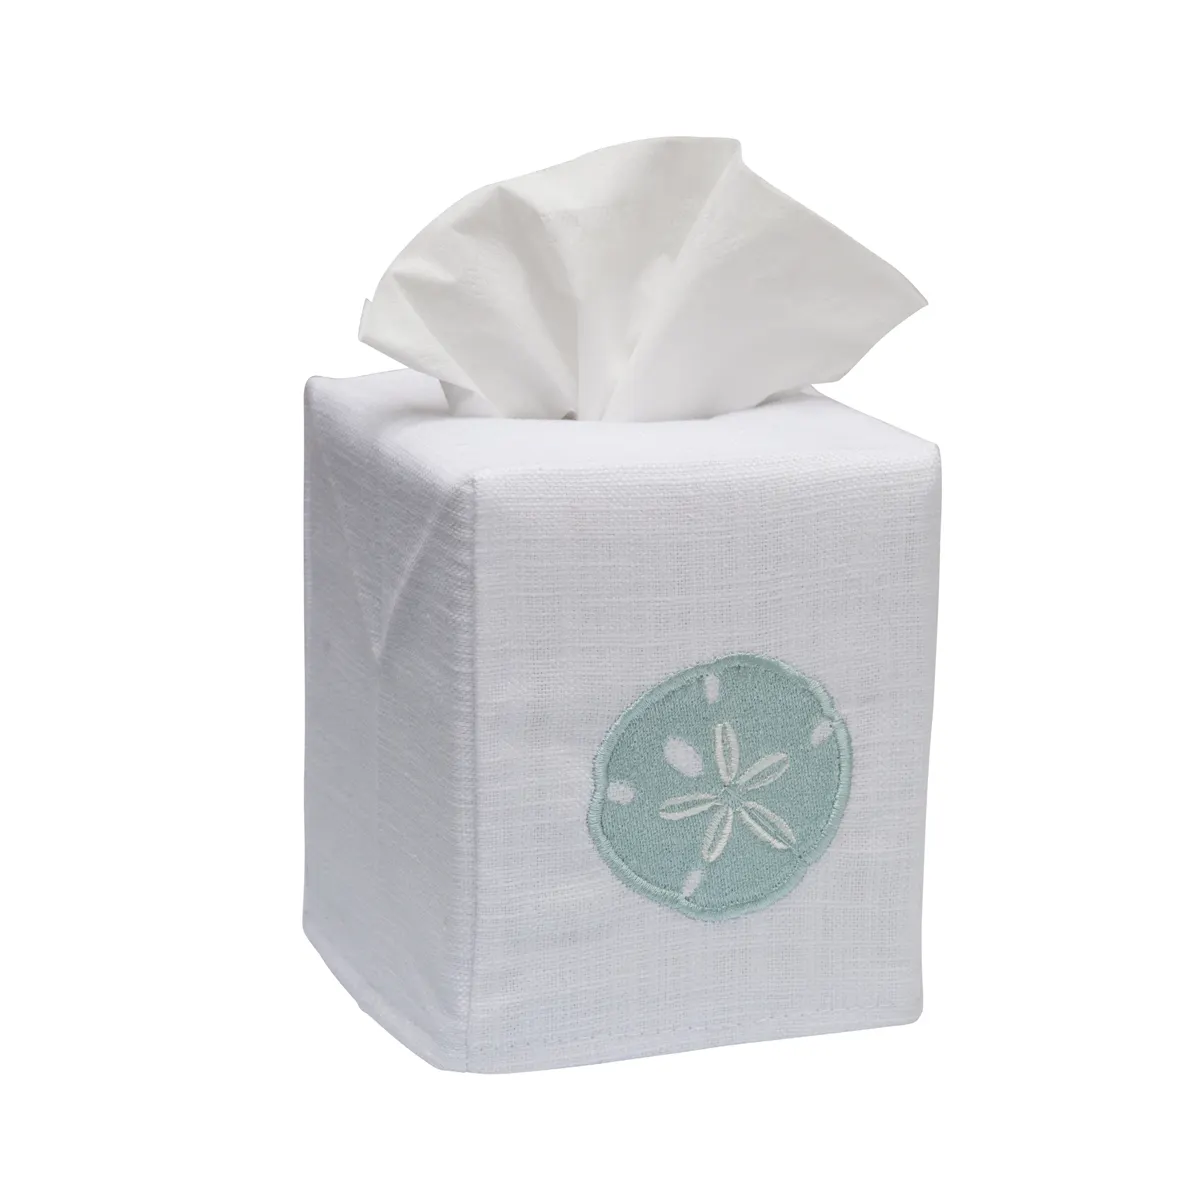 Wholesale Embroidery Square Tissue Box Cover Embroidery Tissue Holder Cover White Linen High Quality For Home Hotel Decor